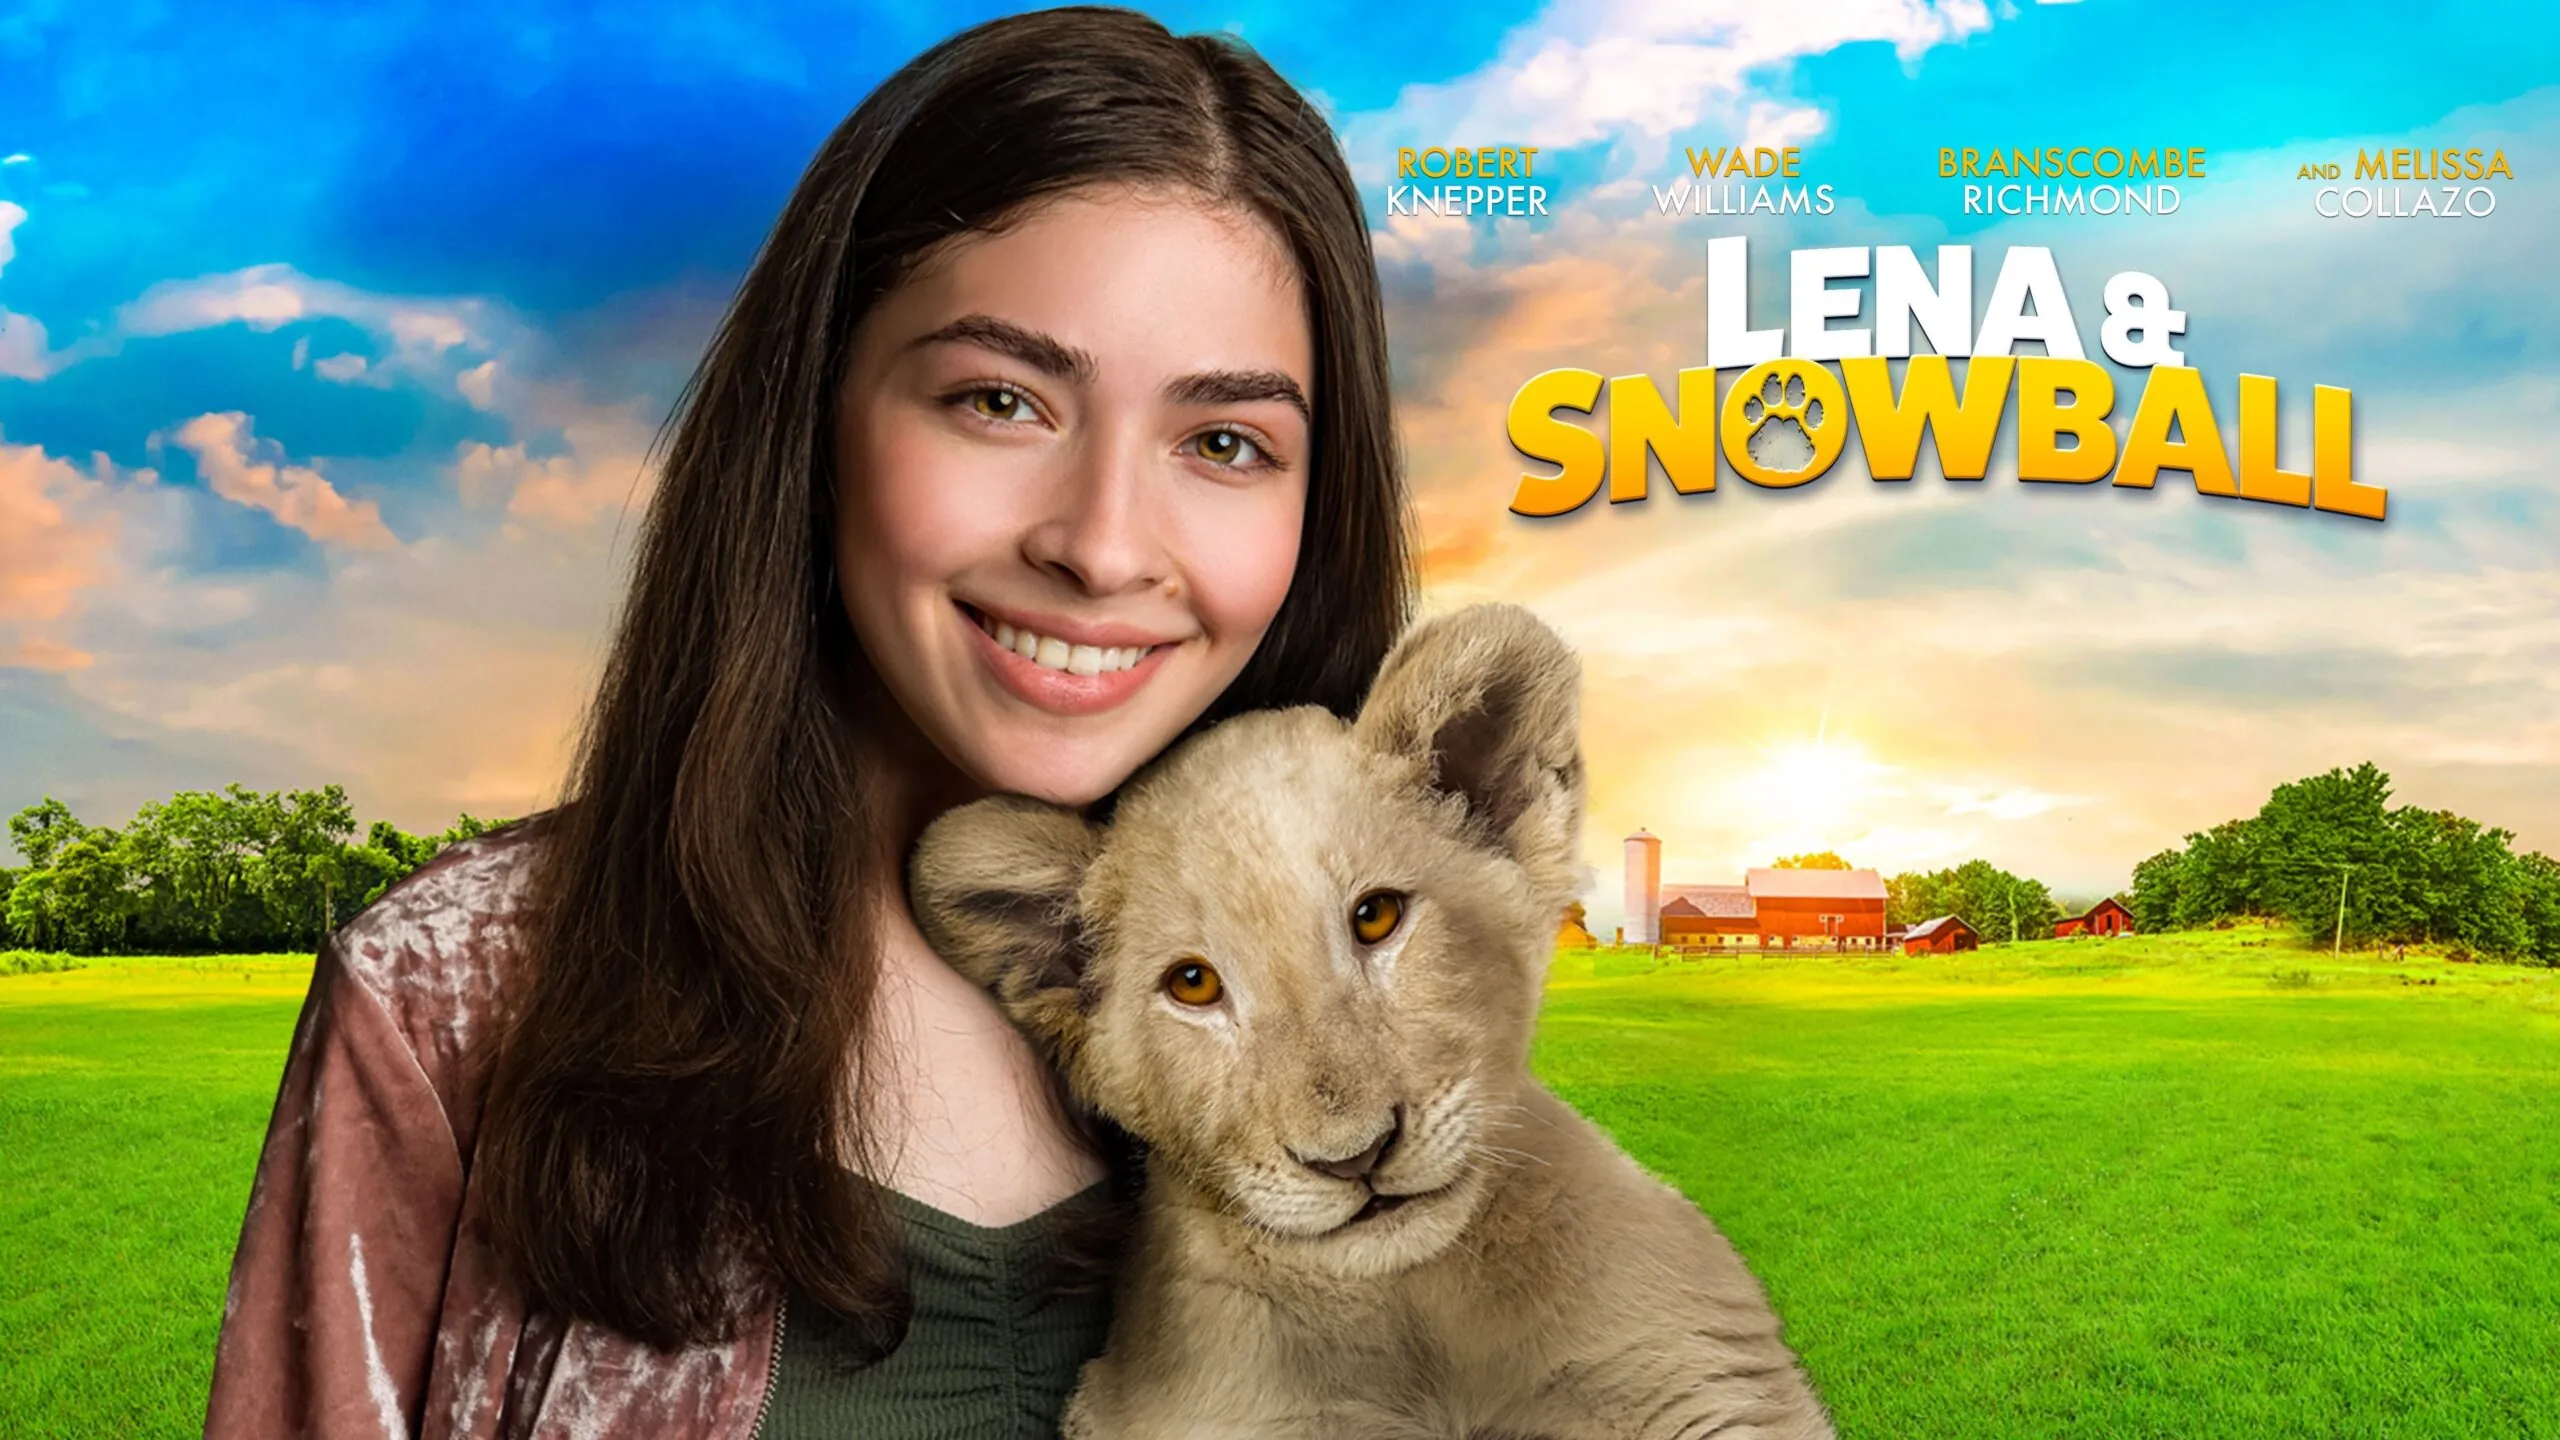 Lena and Snowball